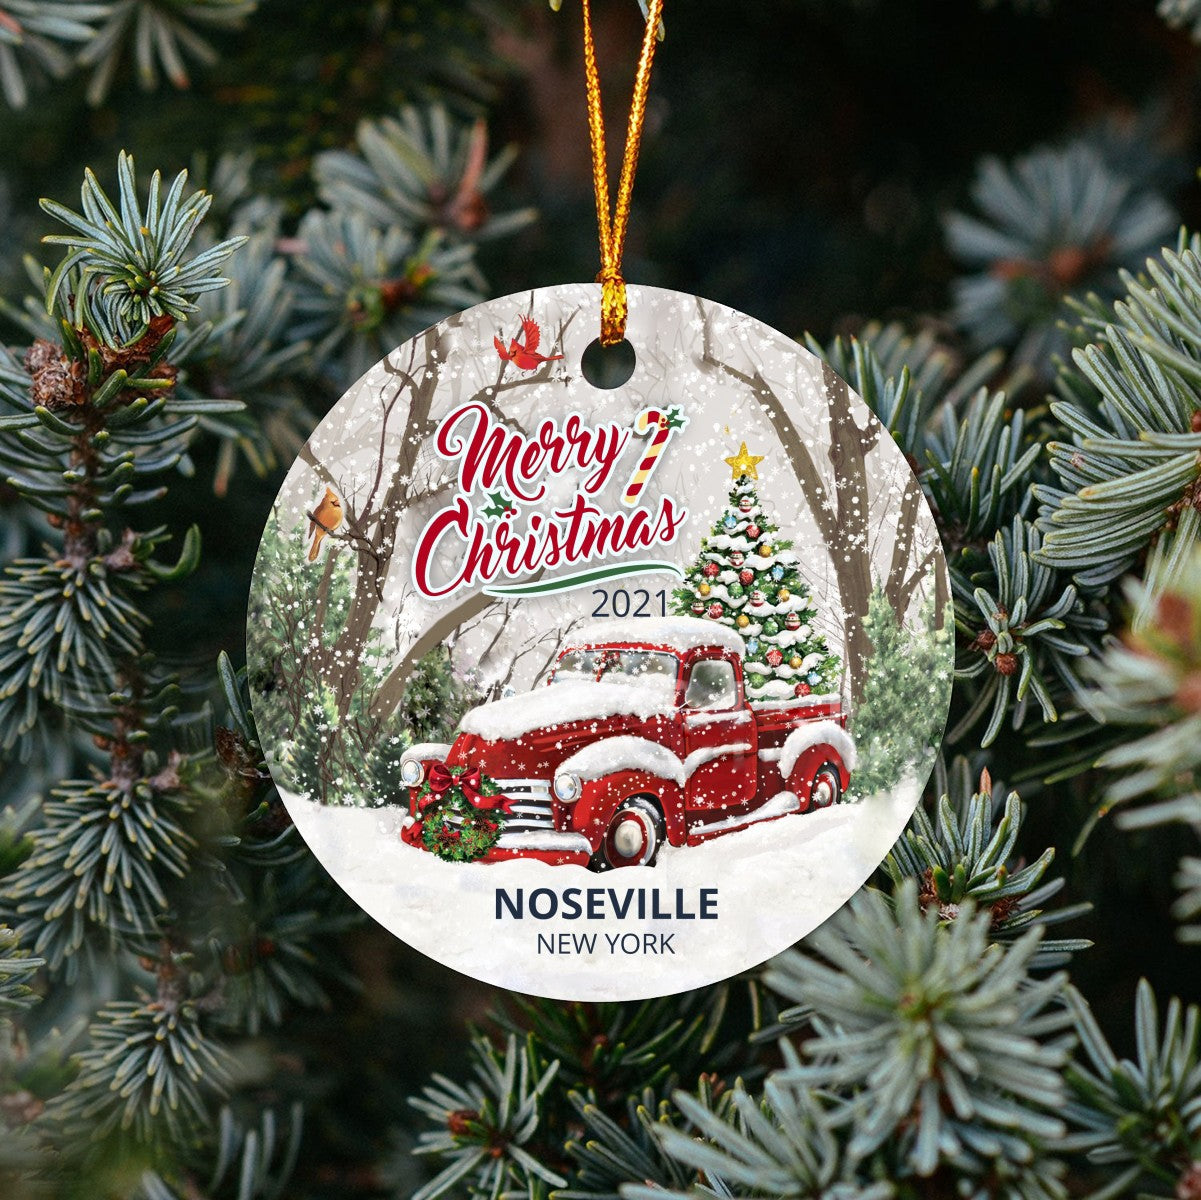 Christmas Tree Ornaments Noseville - Ornament With Name City, State Noseville New York NY Ornament - Red Truck Xmas Ornaments 3'' Plastic Gift For Family, Friend And Housewarming